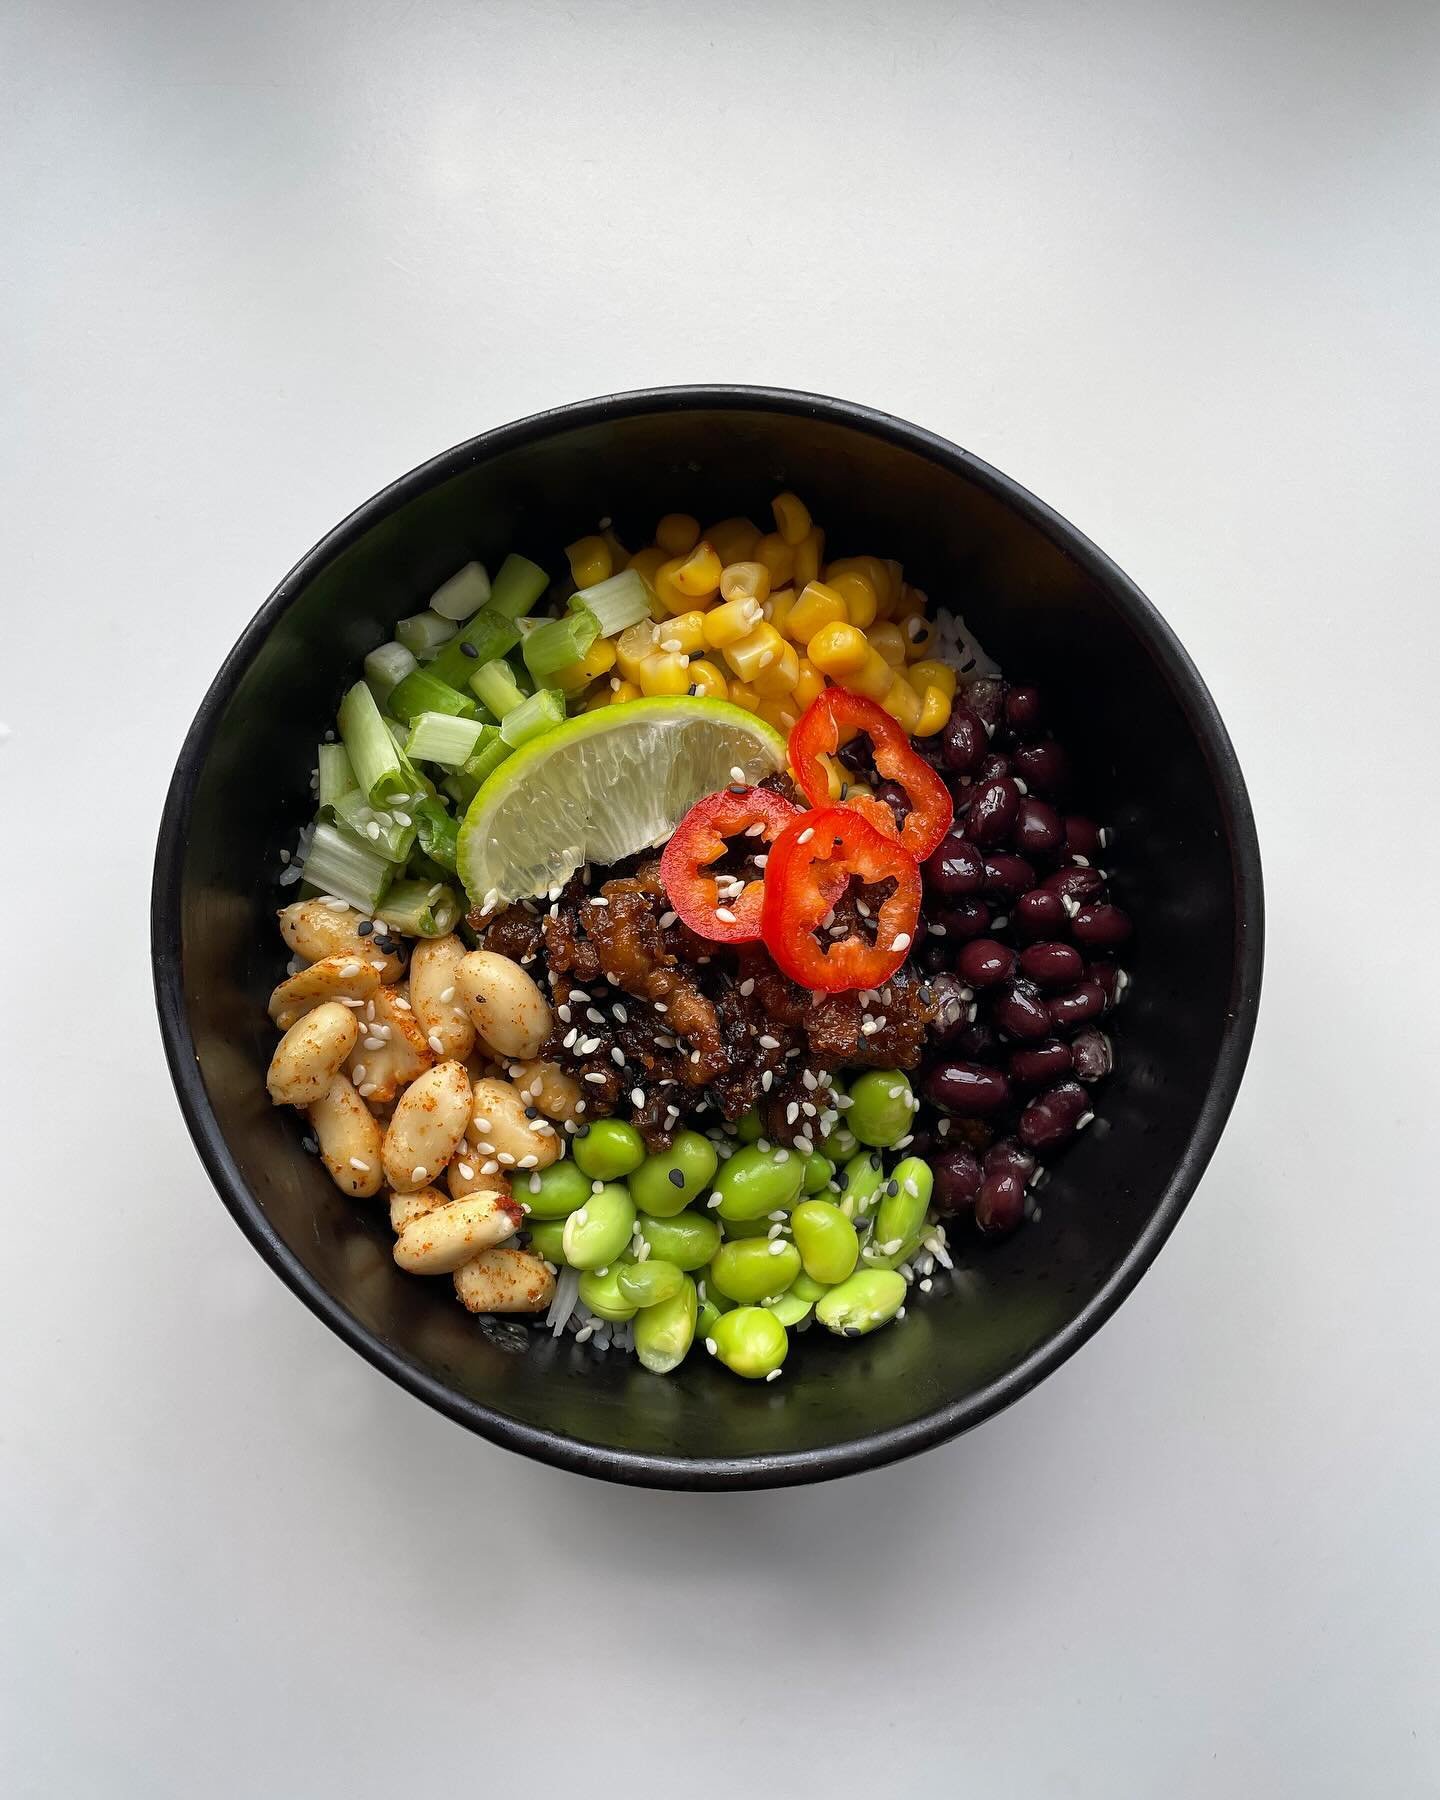 🫛 Plant Protein 🫛

Up your protein with some black beans, edamame beans &amp; peanuts! Add some sweet &amp; spicy garlic tofu to get an extra 12g of protein 💪